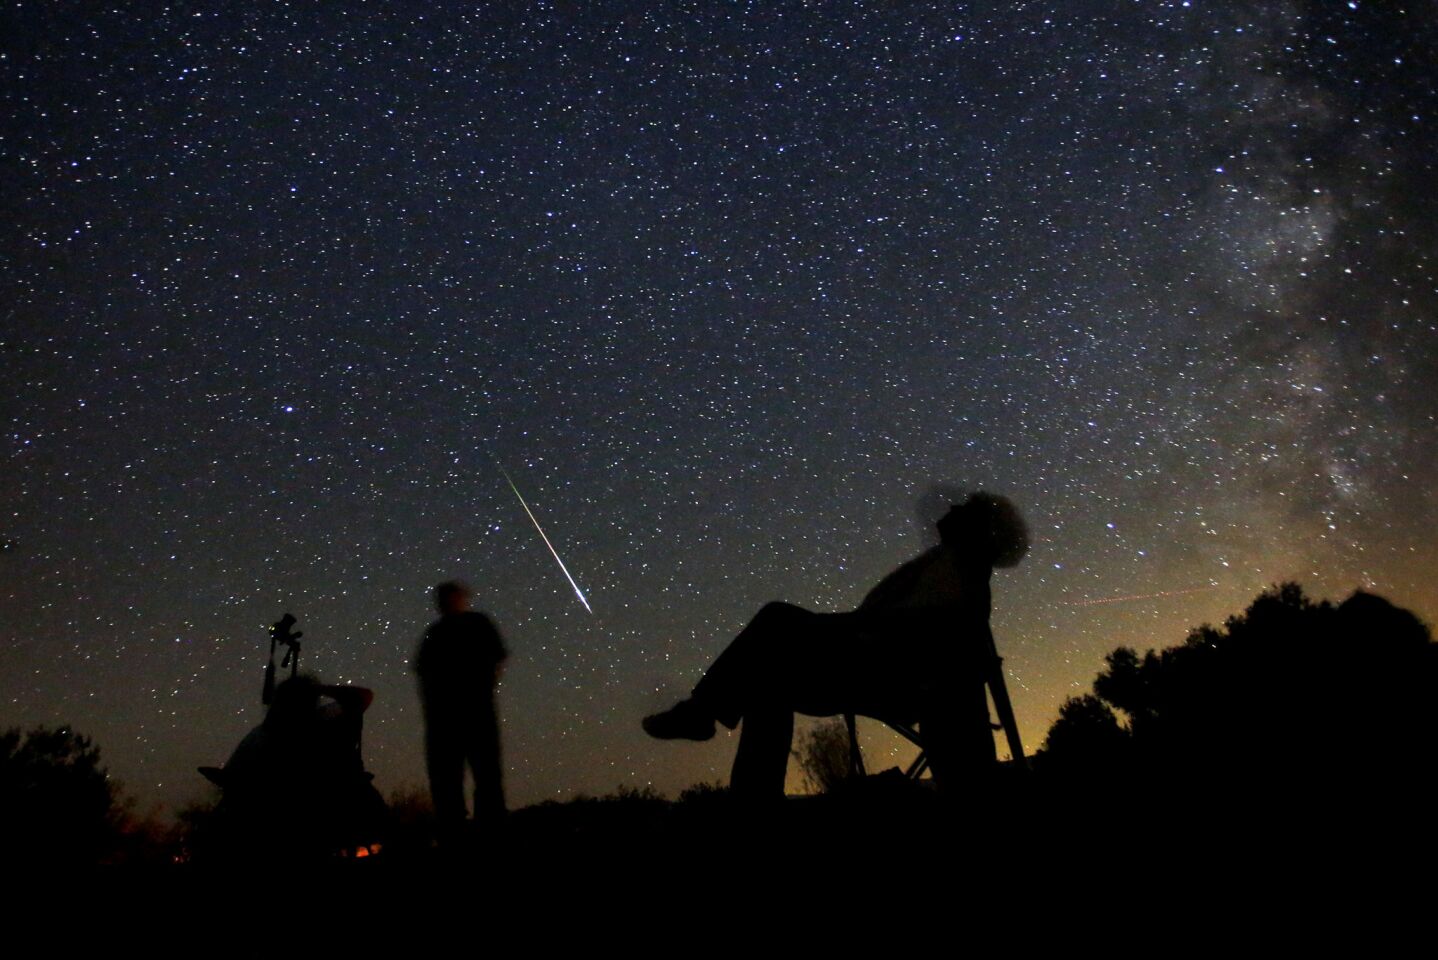 Stargazers on a tour with California Overland Desert Excursions watch the night sky above Anza-Borrego Desert State Park in Southern California as a meteor streaks by during the annual Perseid meteor shower.